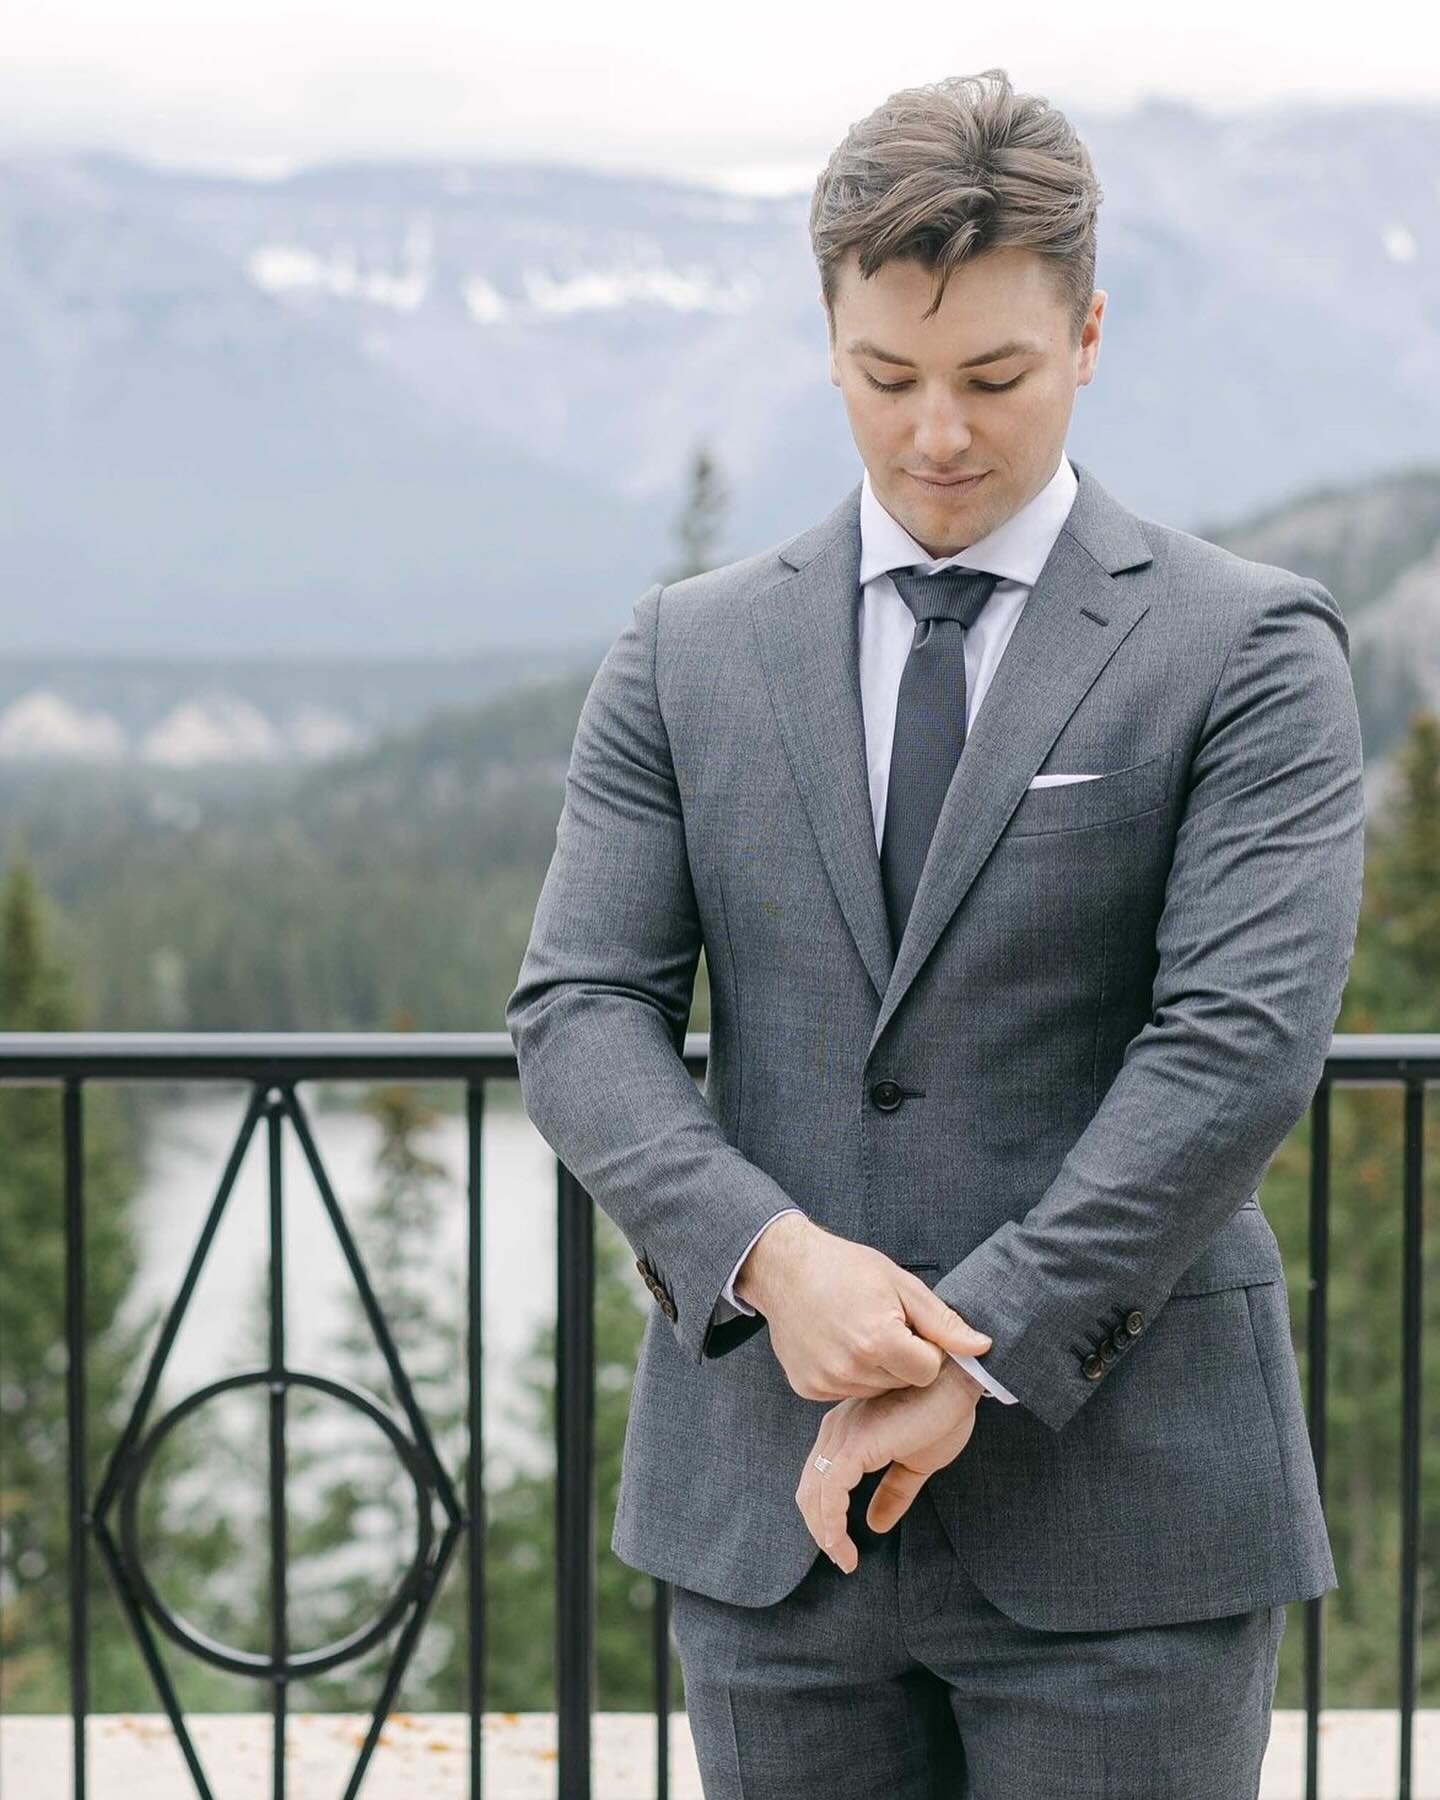 If you&rsquo;re looking for the perfect custom tailored suit to get married in, @ateliersuiting will exceed all of your expectations 🤵🏻&zwj;♂️🤍

Banff elopement | Fairmont Banff Springs wedding | Banff wedding photographer | Elope in Banff | Banff